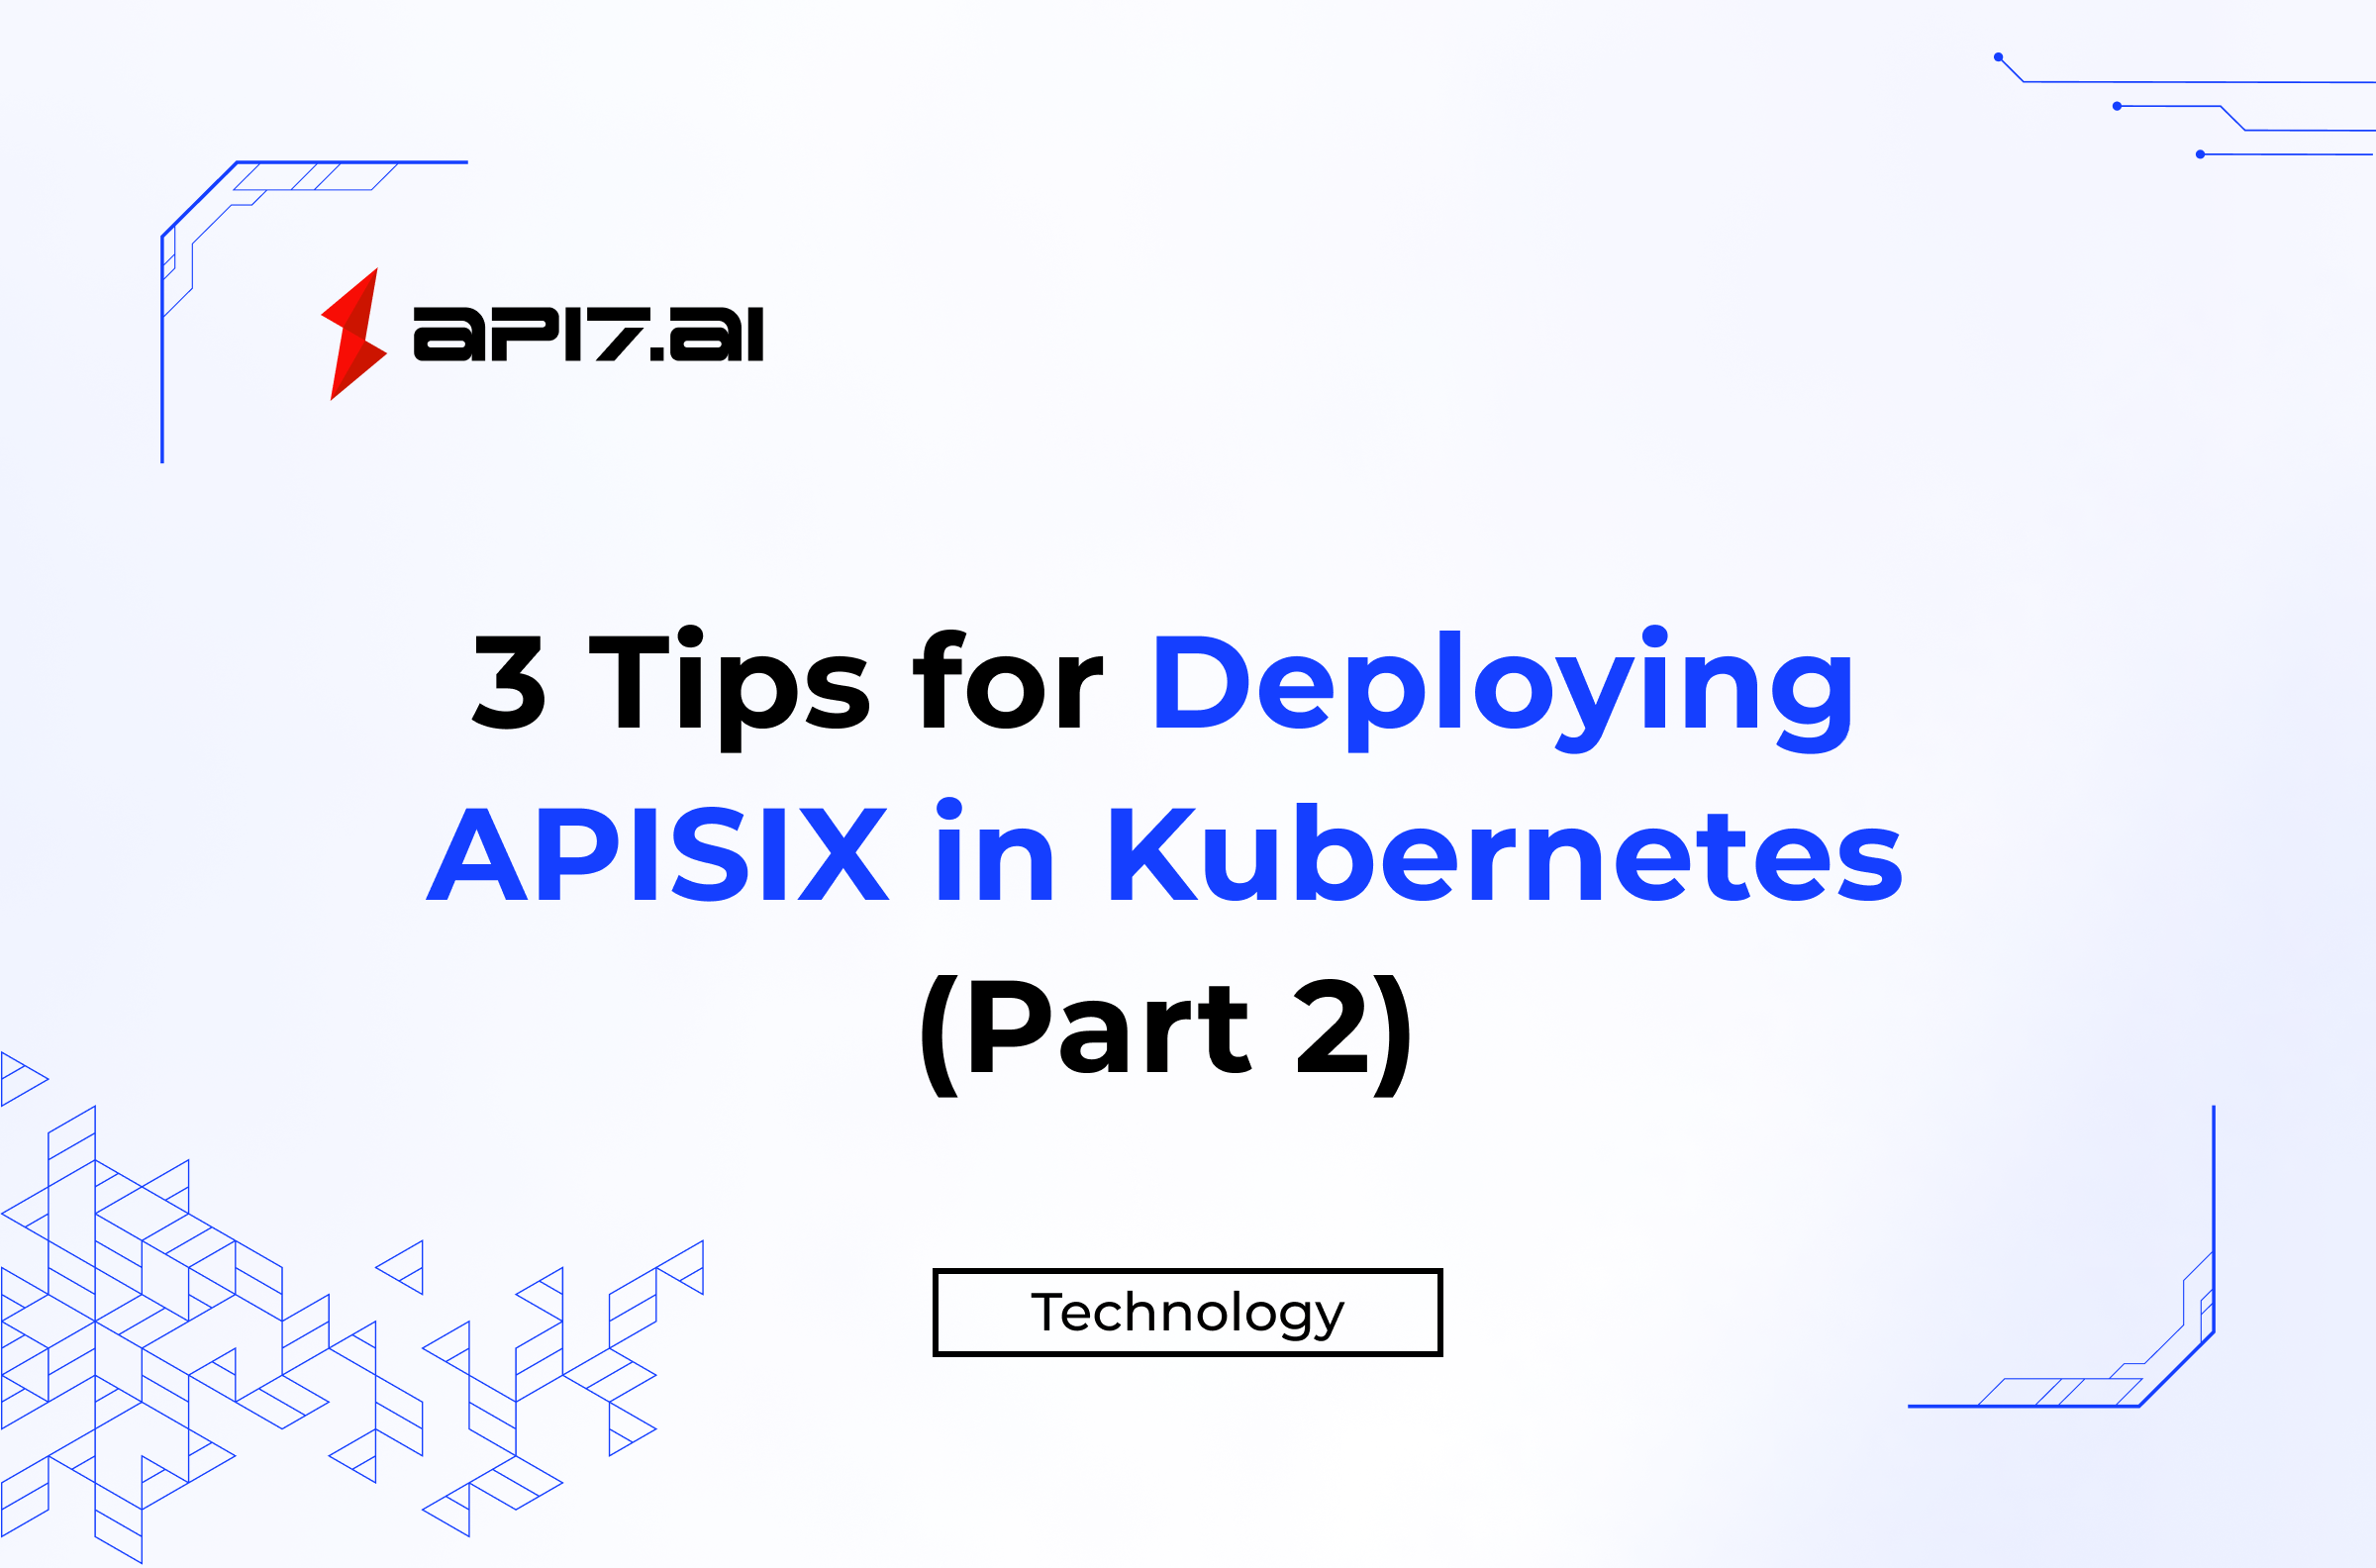 3 Tips for Deploying APISIX in Kubernetes (Part 2)